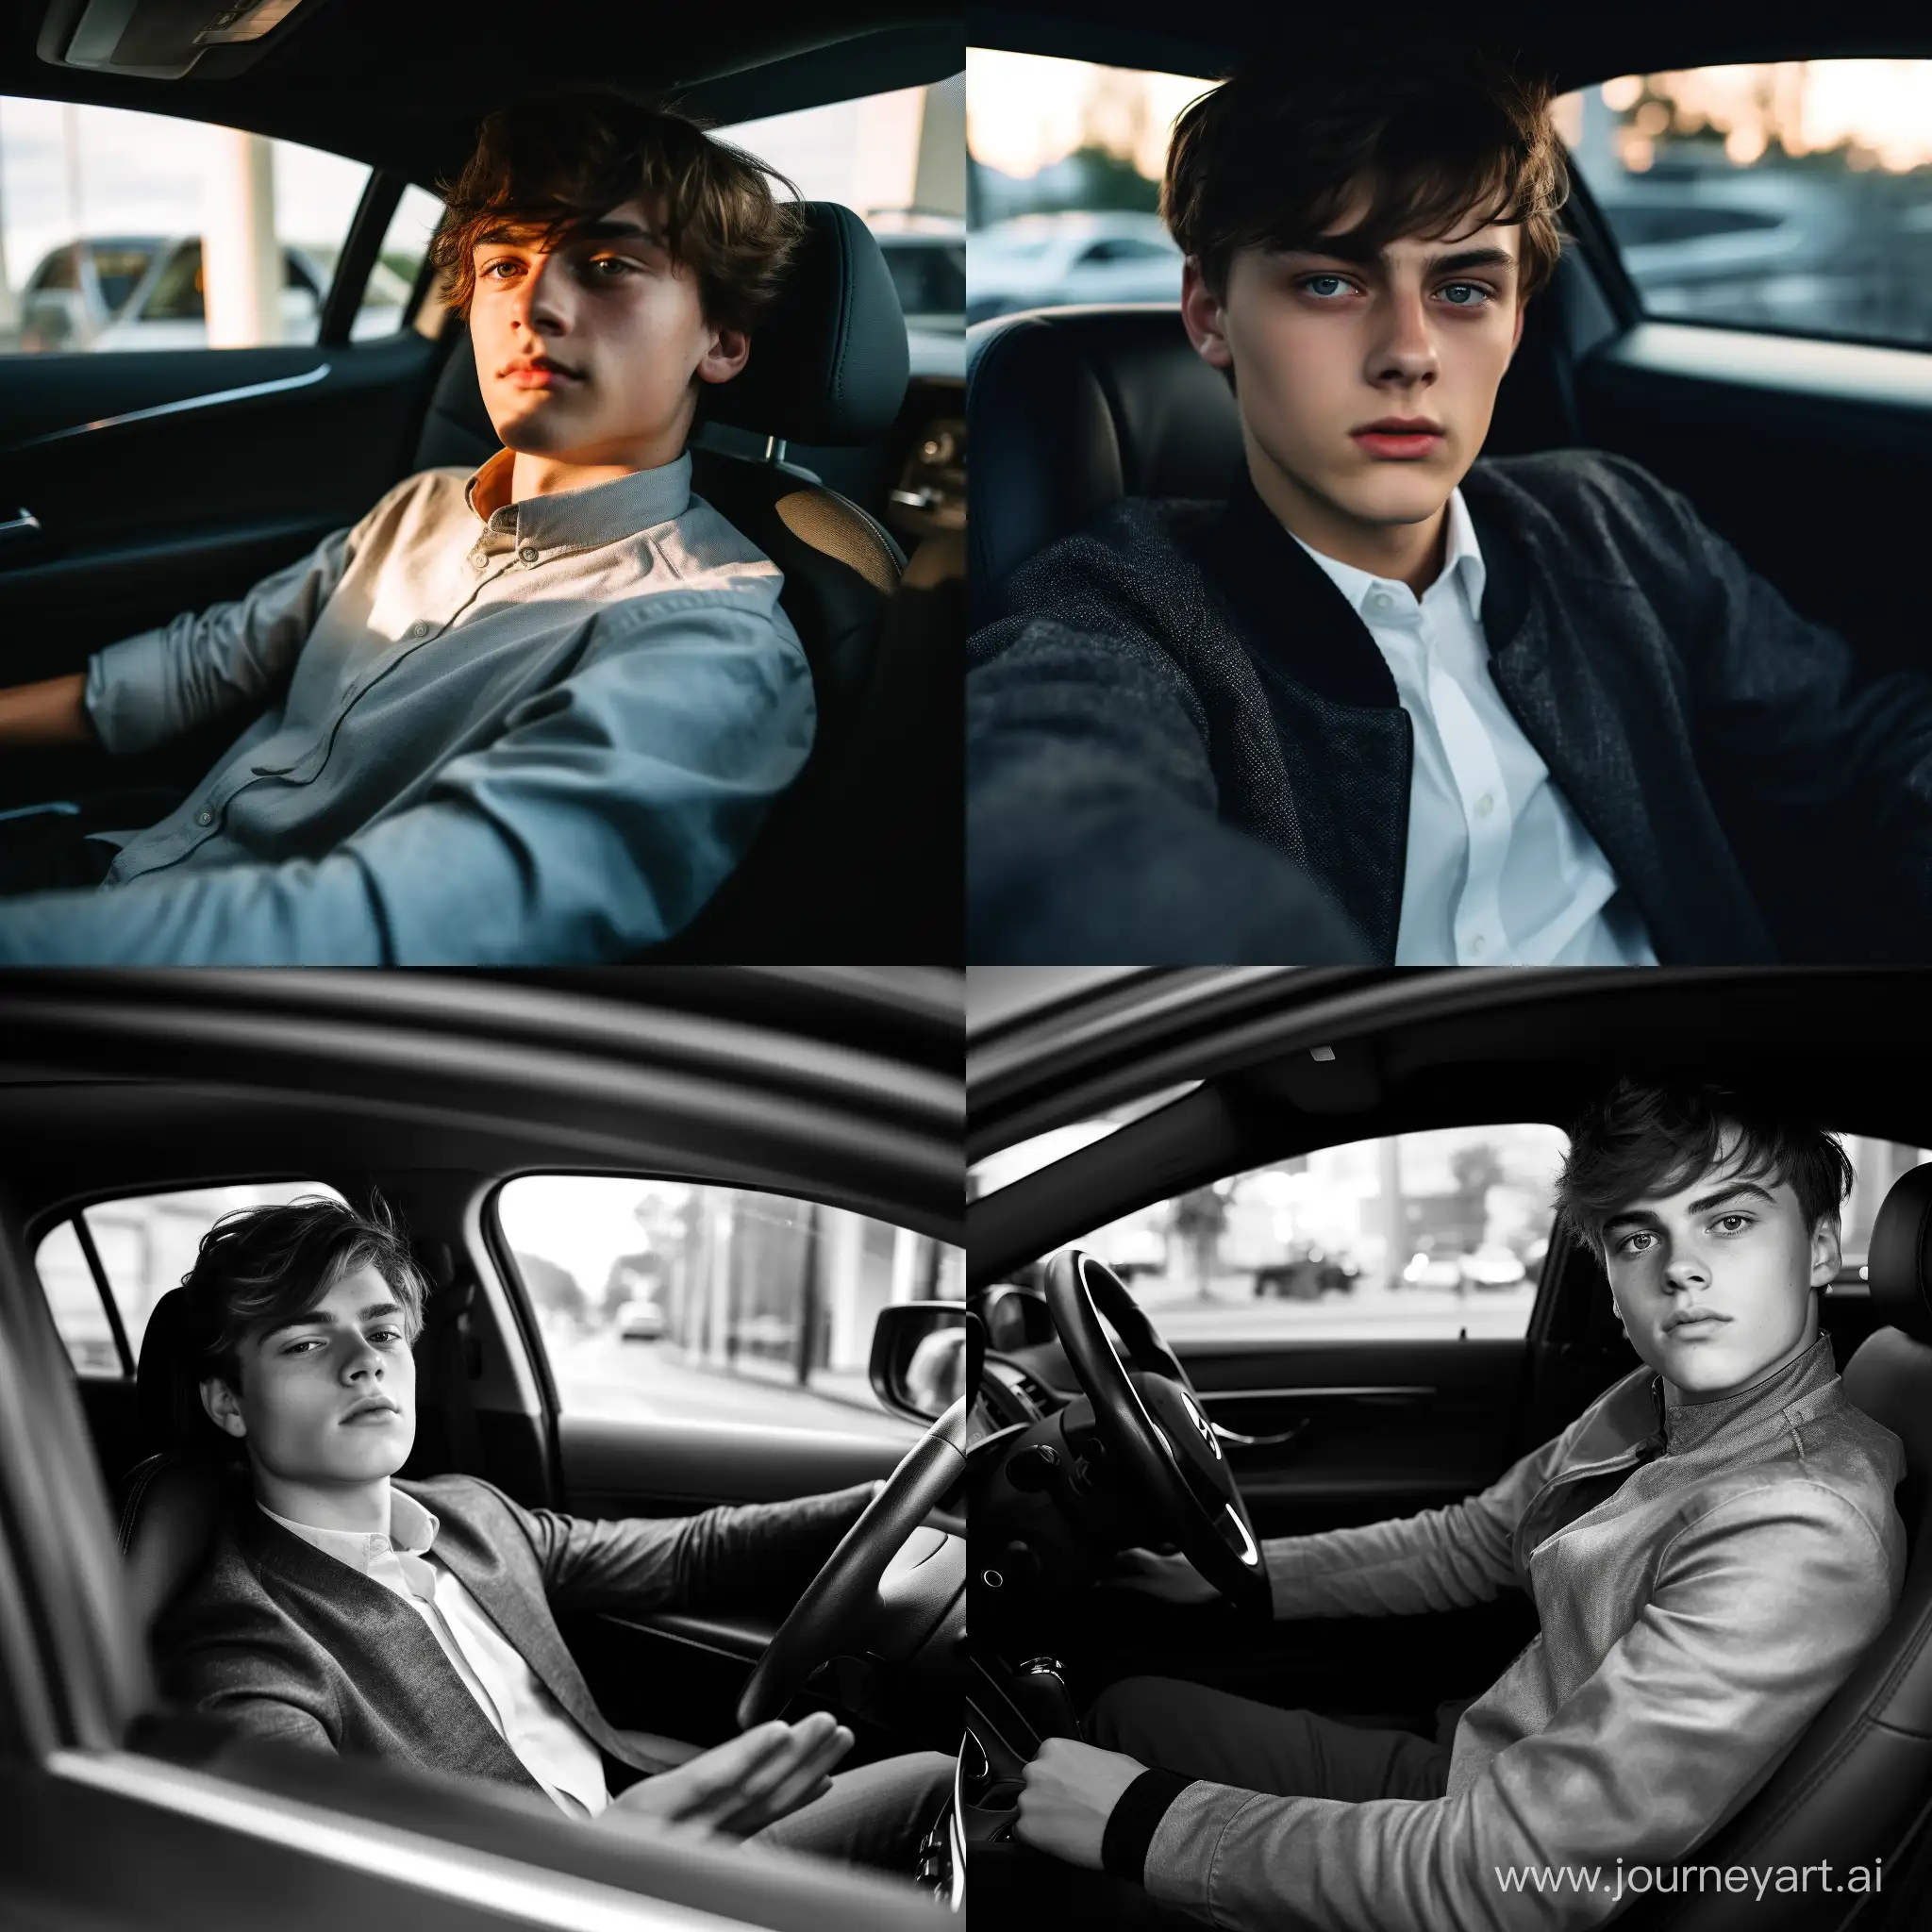 Stylish-European-Teenager-in-a-Mercedes-Maybach-Cinematic-CloseUp-Portrait